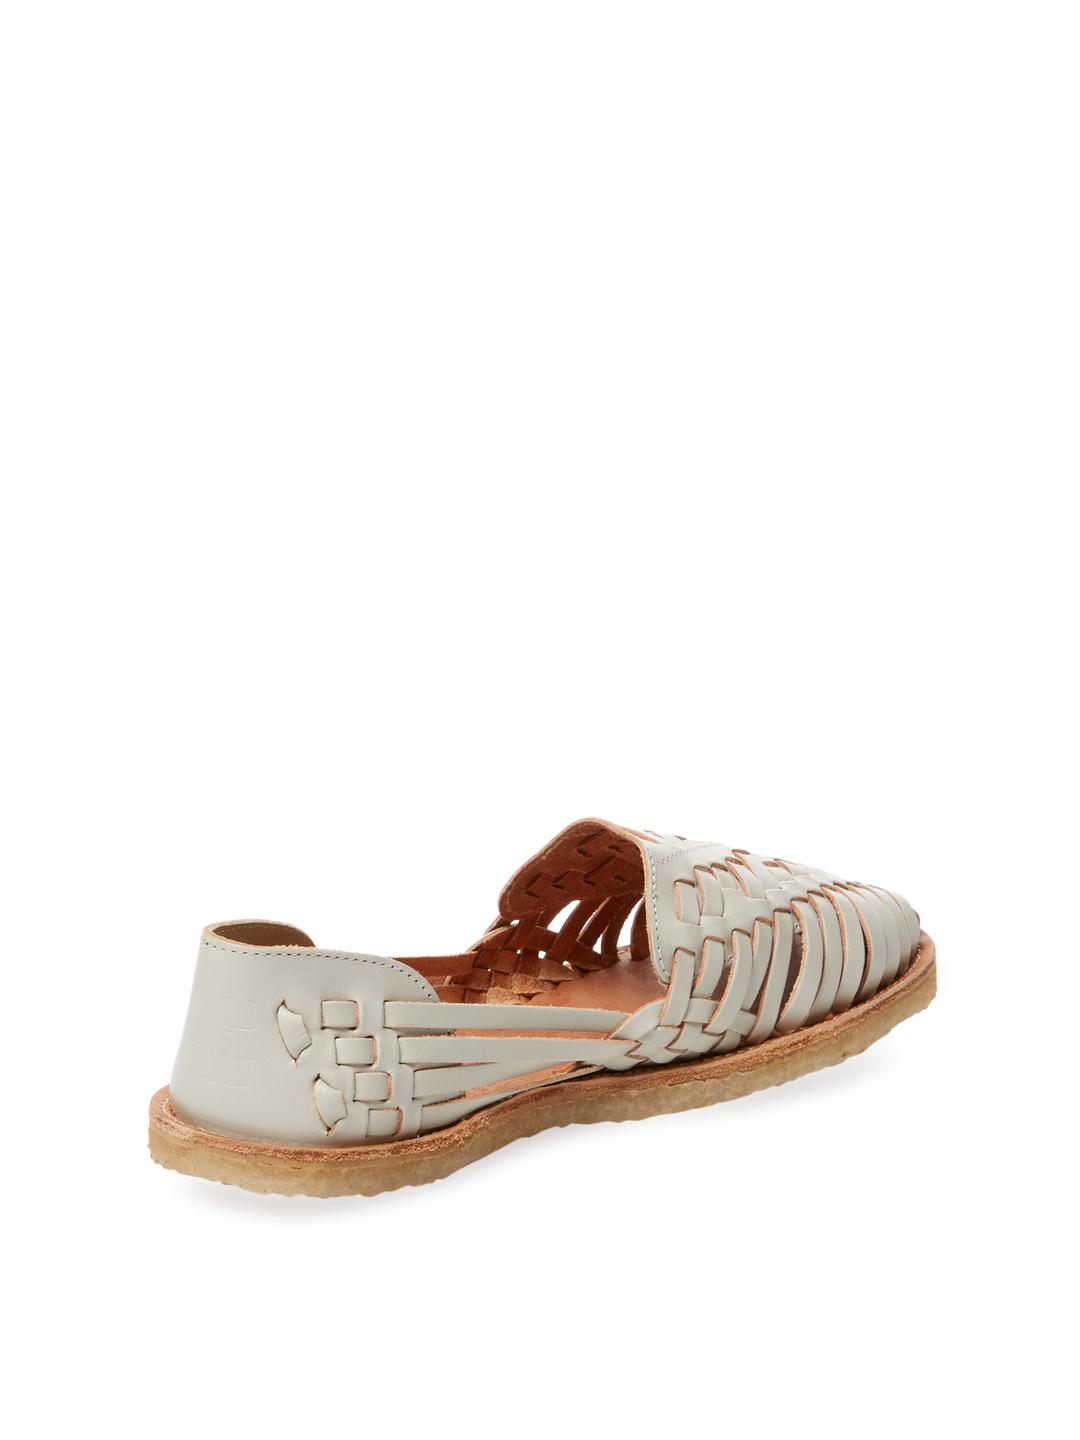 TOMS Mexico Leather Huarache Sandal | Lyst